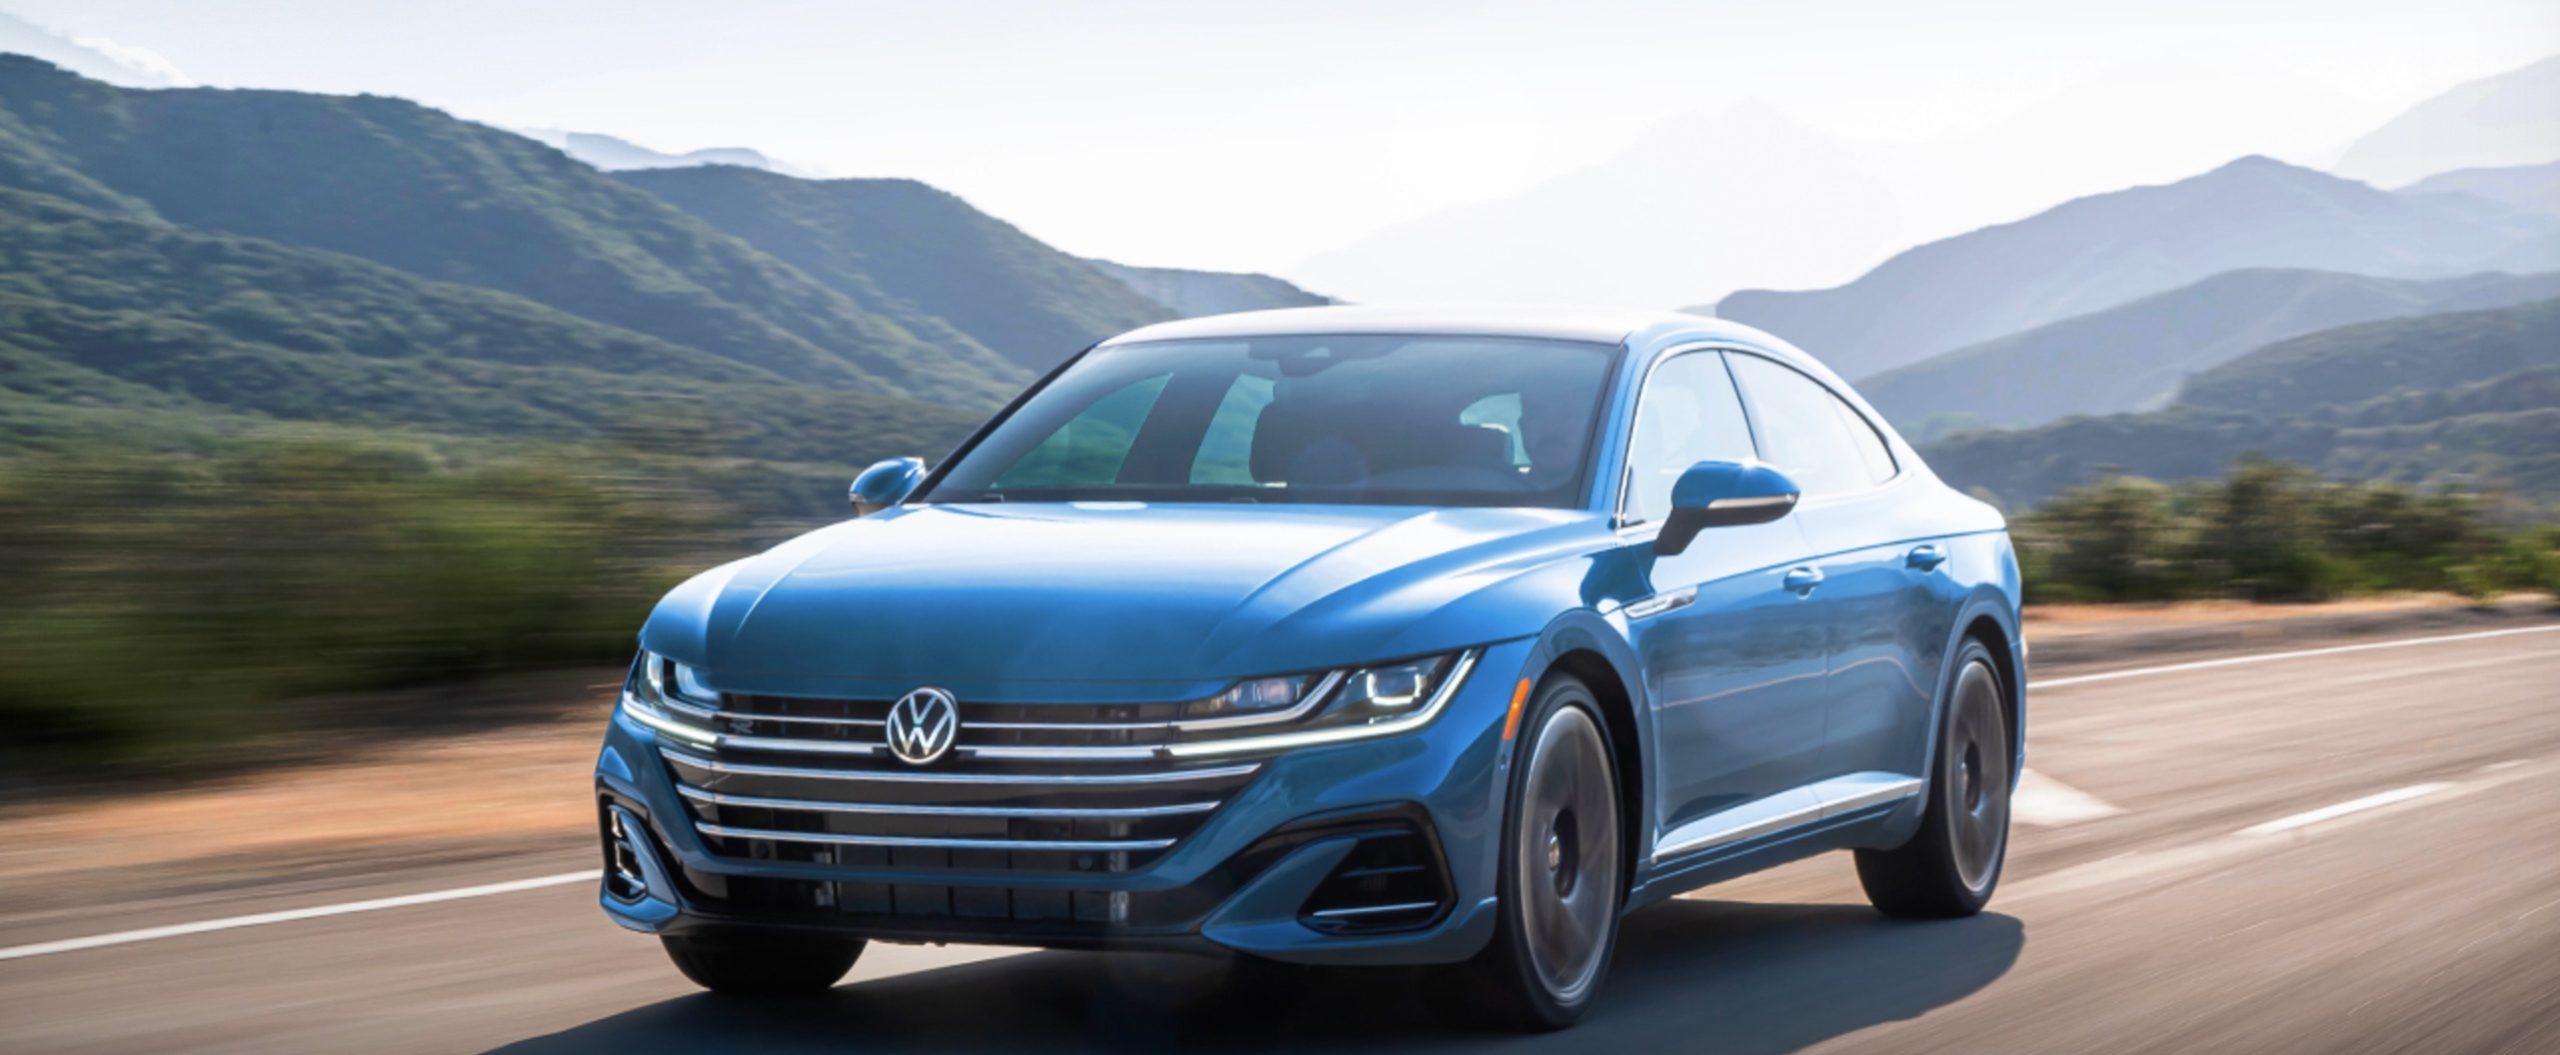 The 20223 VW Arteon driving on a mountain road showcasing the 2023 Volkswagen Arteon specs